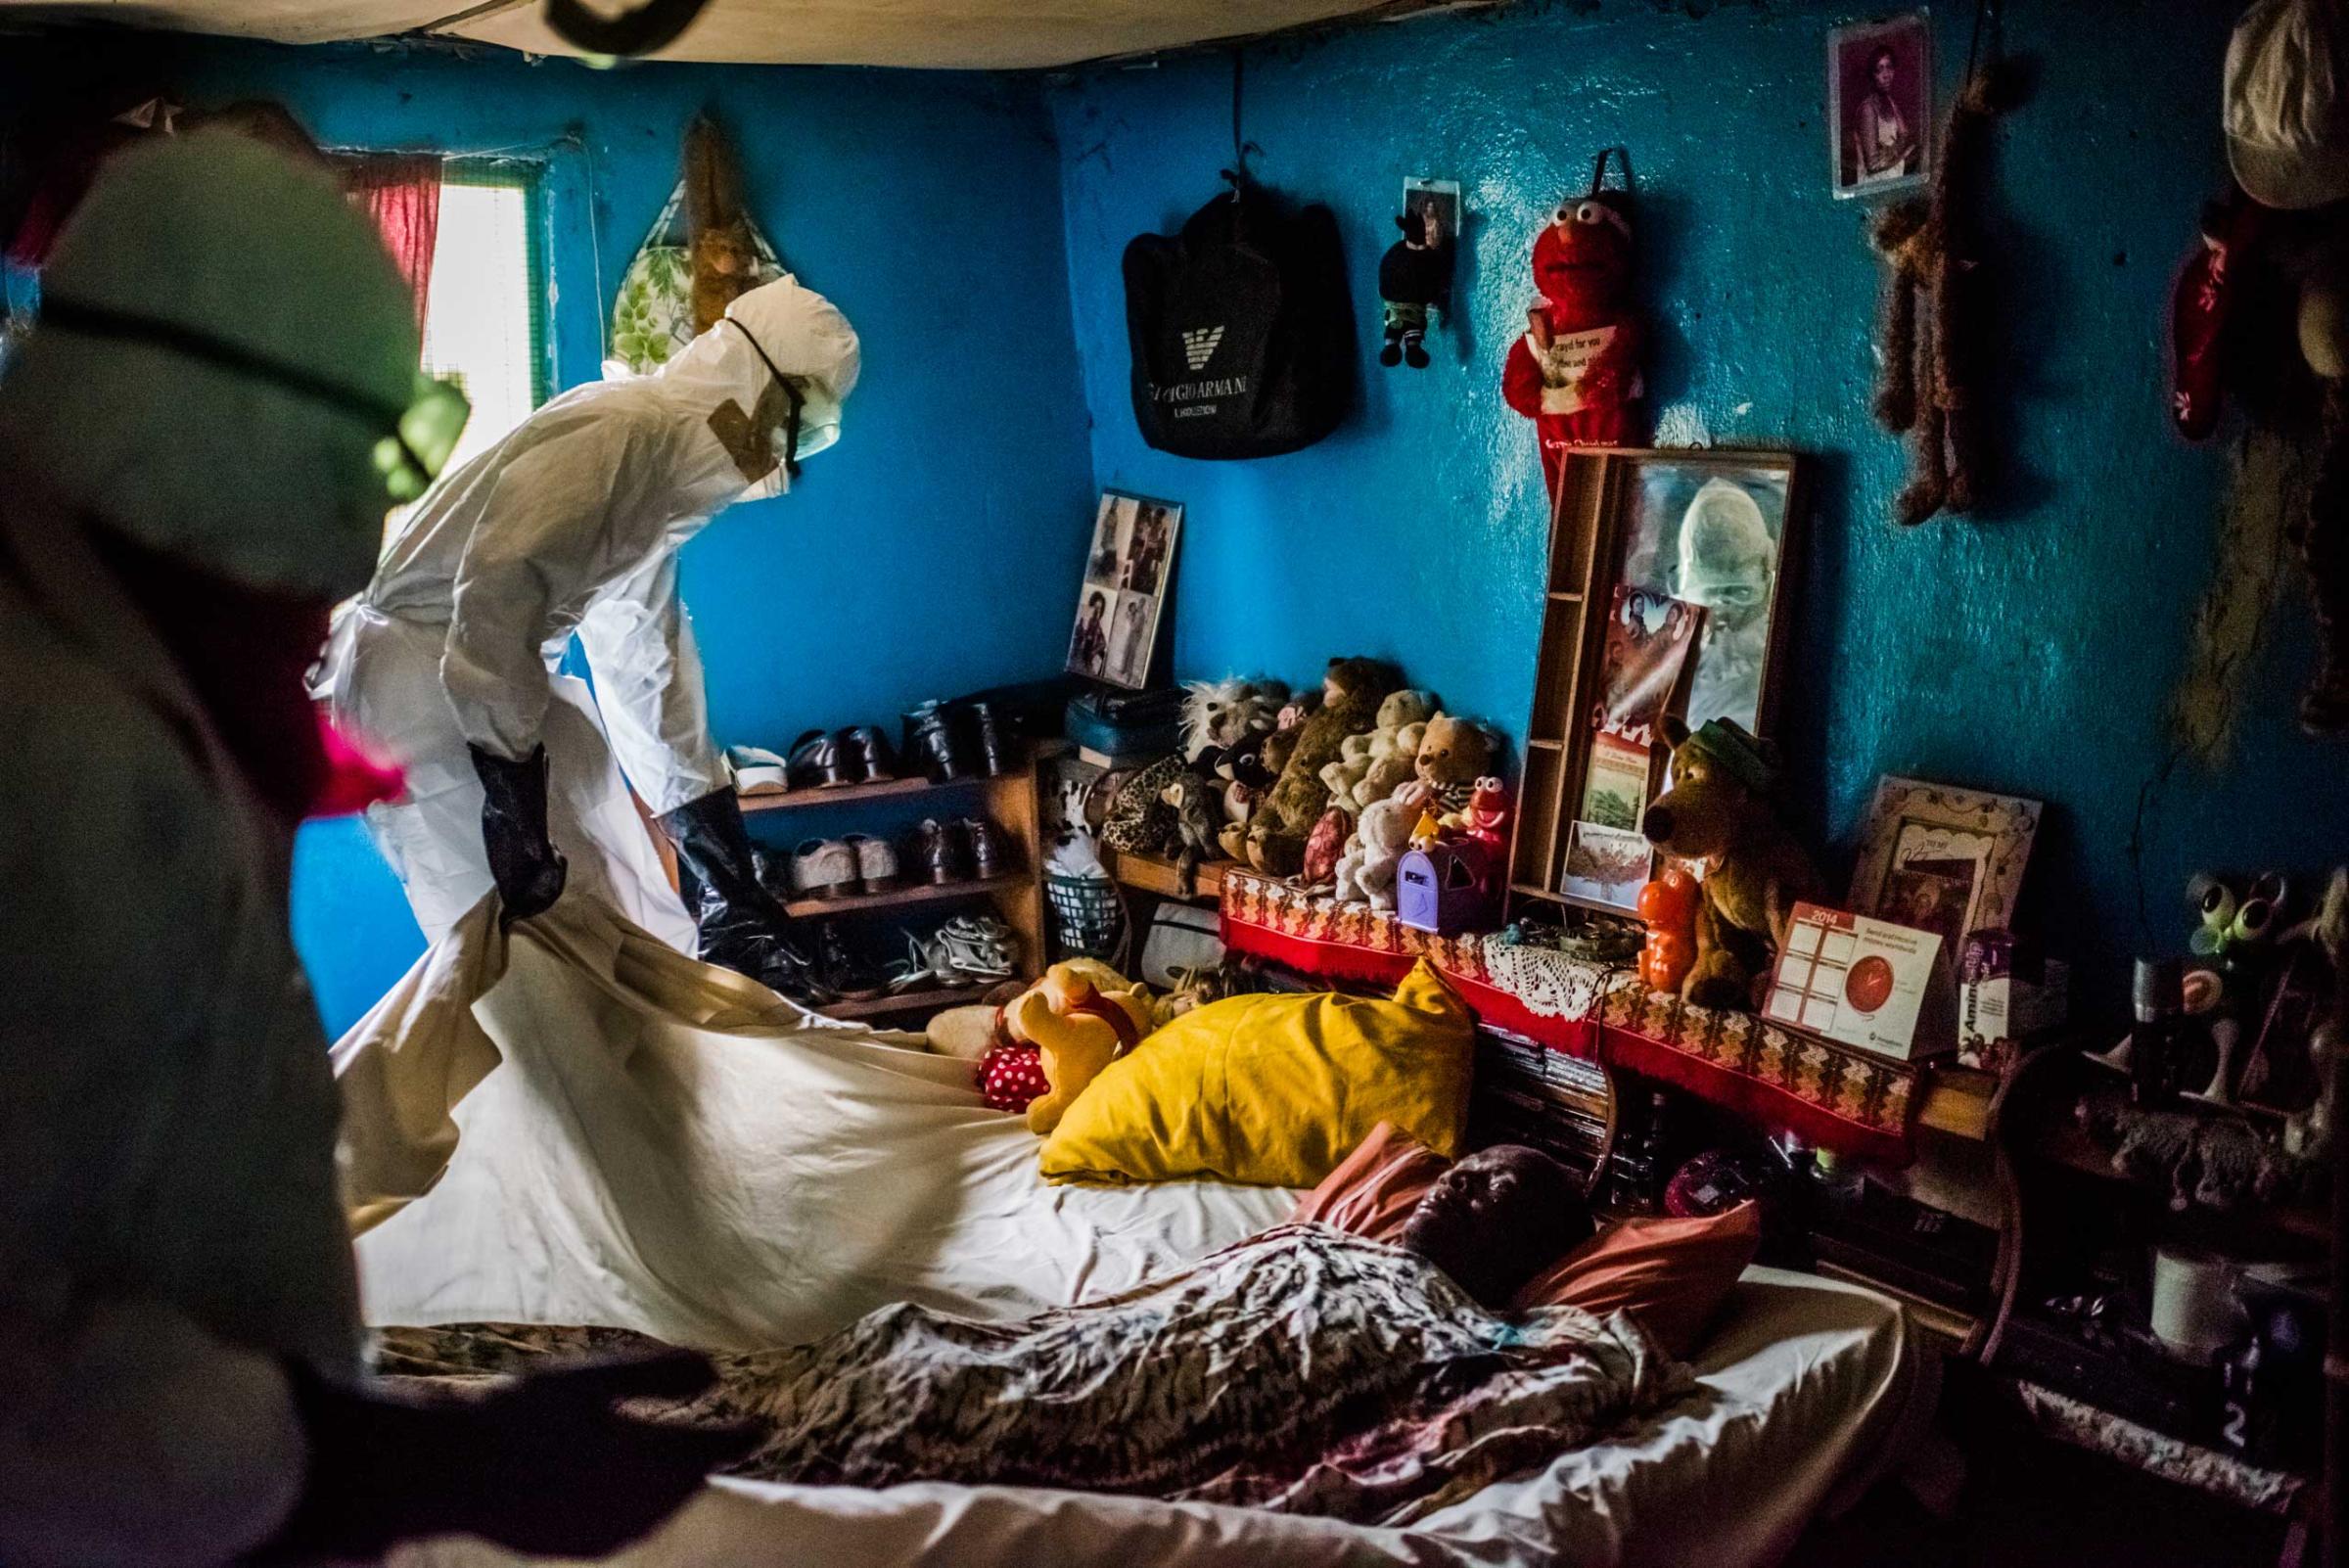 Members of a burial team from the Liberian Red Cross remove the body of a man, a suspected Ebola victim, from a home in Matadi on Sept. 17, 2014 in Monrovia, Liberia.